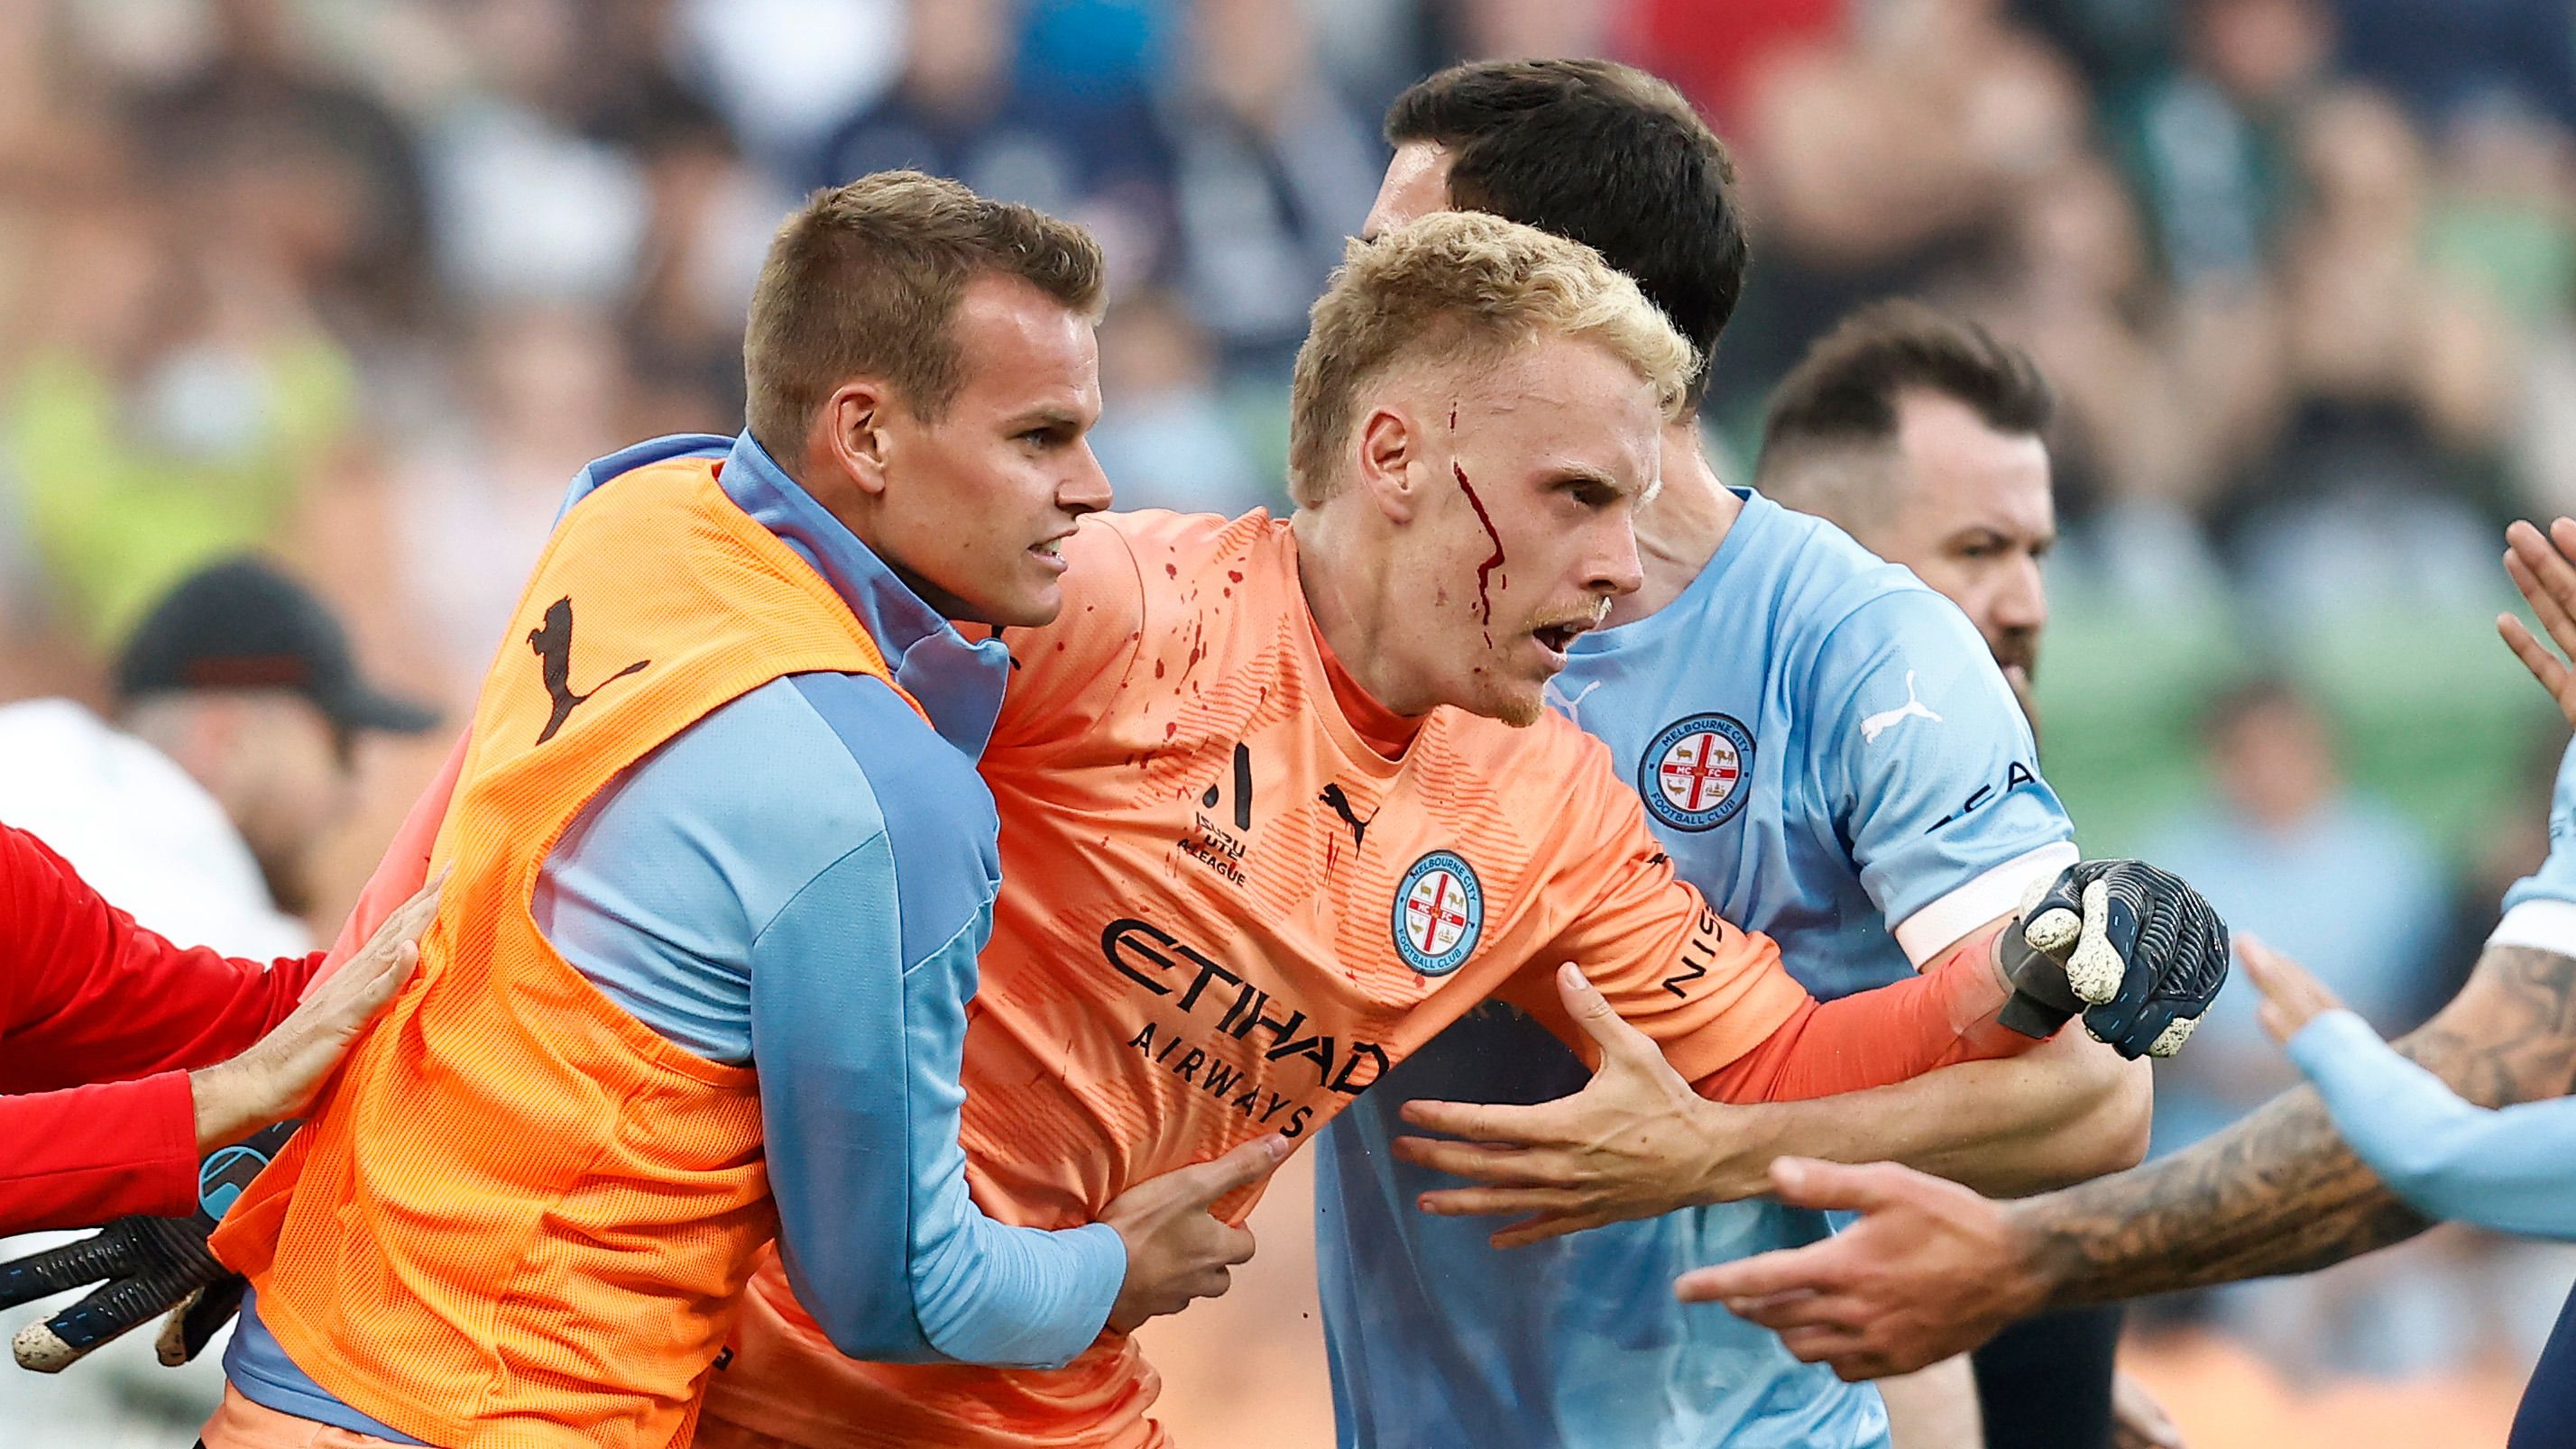 A-Leagues deal that caused chaotic fan stampede, player assault to be scrapped after one year